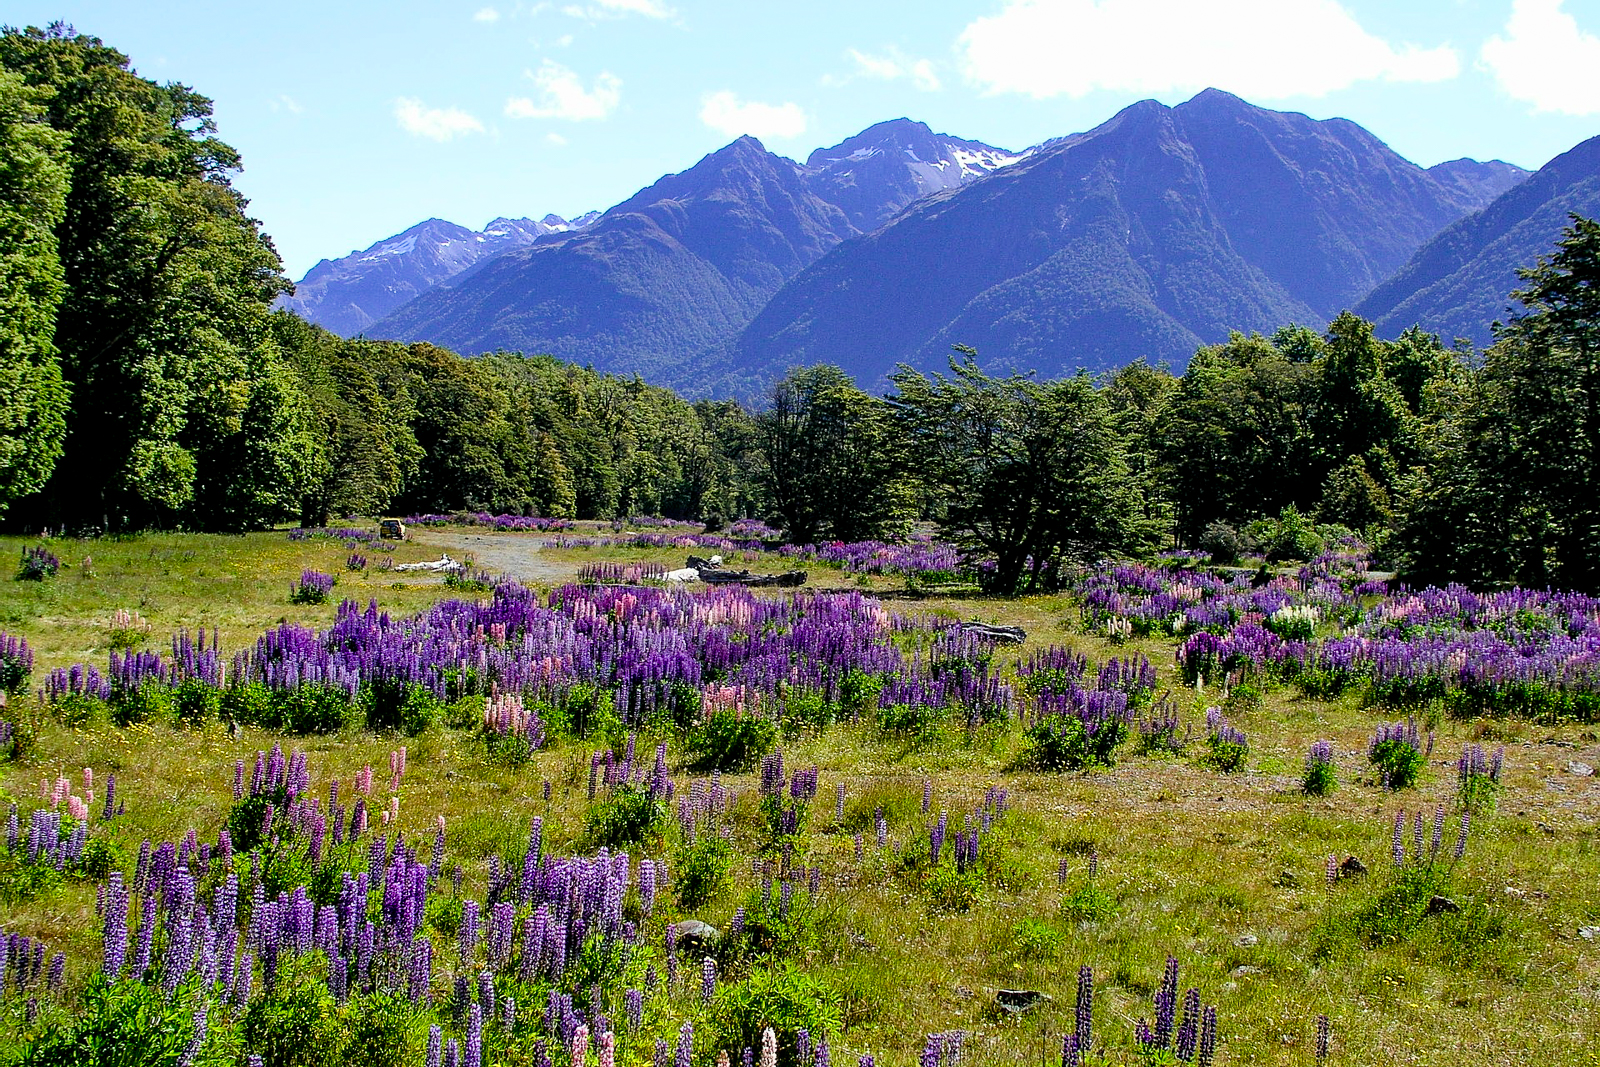 Purple flowers in the valleys of Arthur's Pass